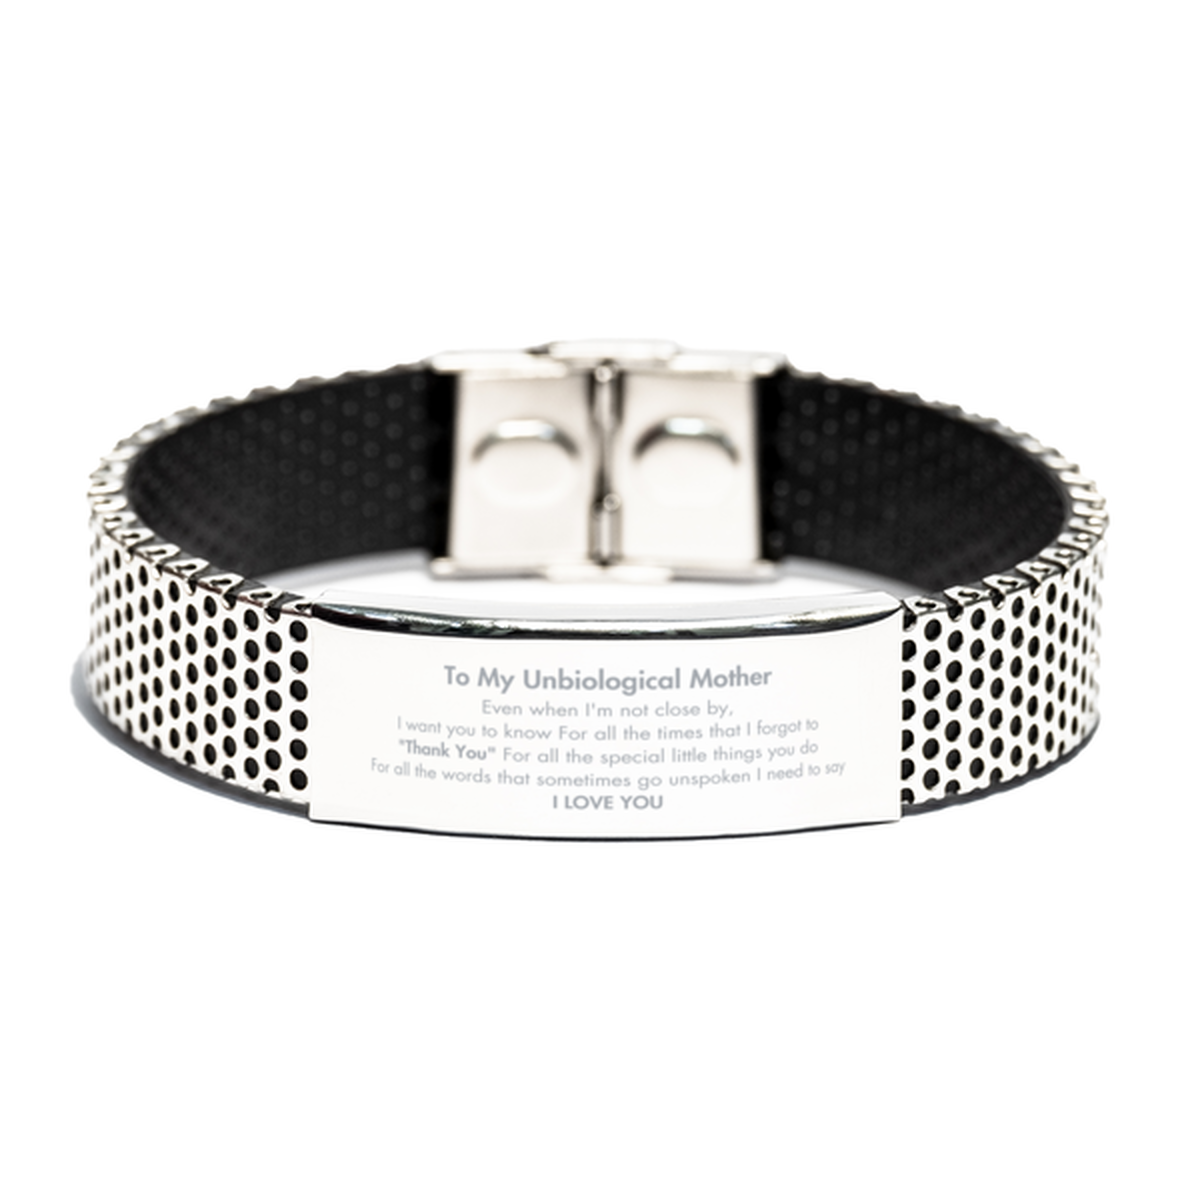 Thank You Gifts for Unbiological Mother, Keepsake Stainless Steel Bracelet Gifts for Unbiological Mother Birthday Mother's day Father's Day Unbiological Mother For all the words That sometimes go unspoken I need to say I LOVE YOU